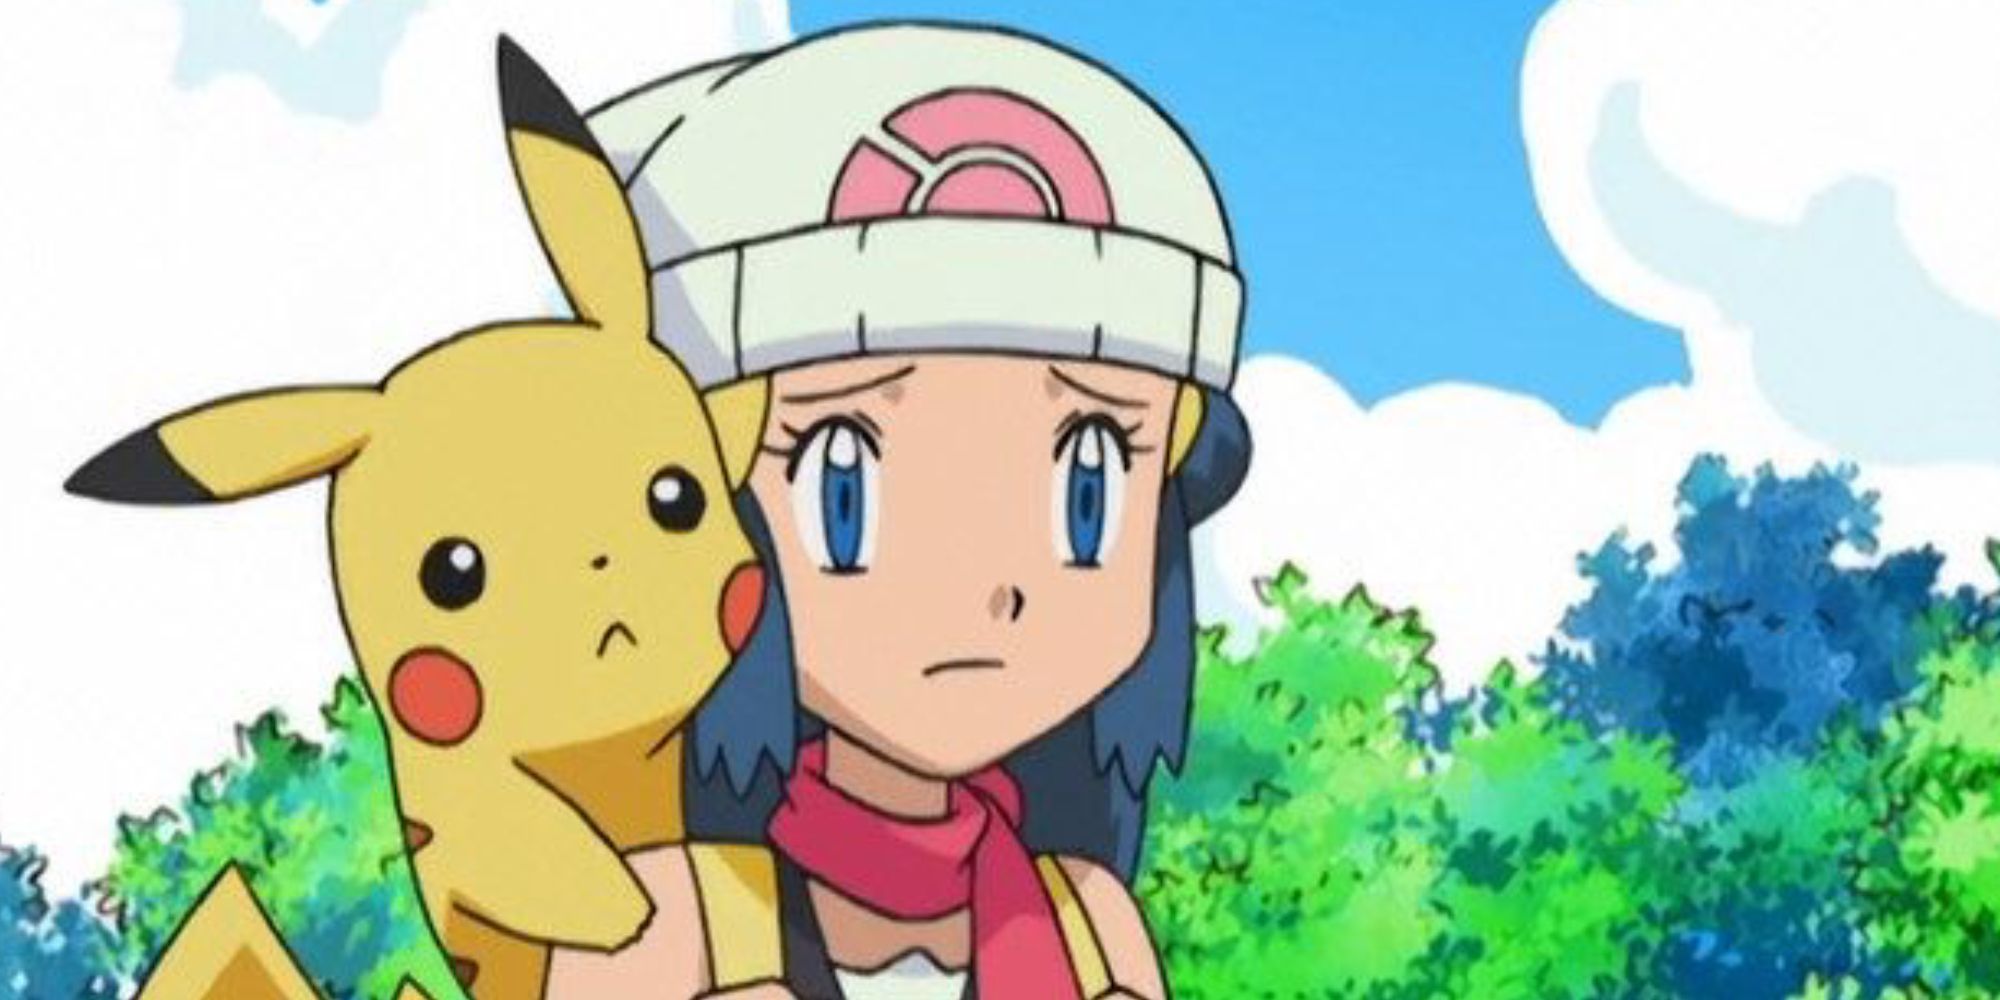 Dawn and Pikachu in the second episode of the sinnoh installment of the series.